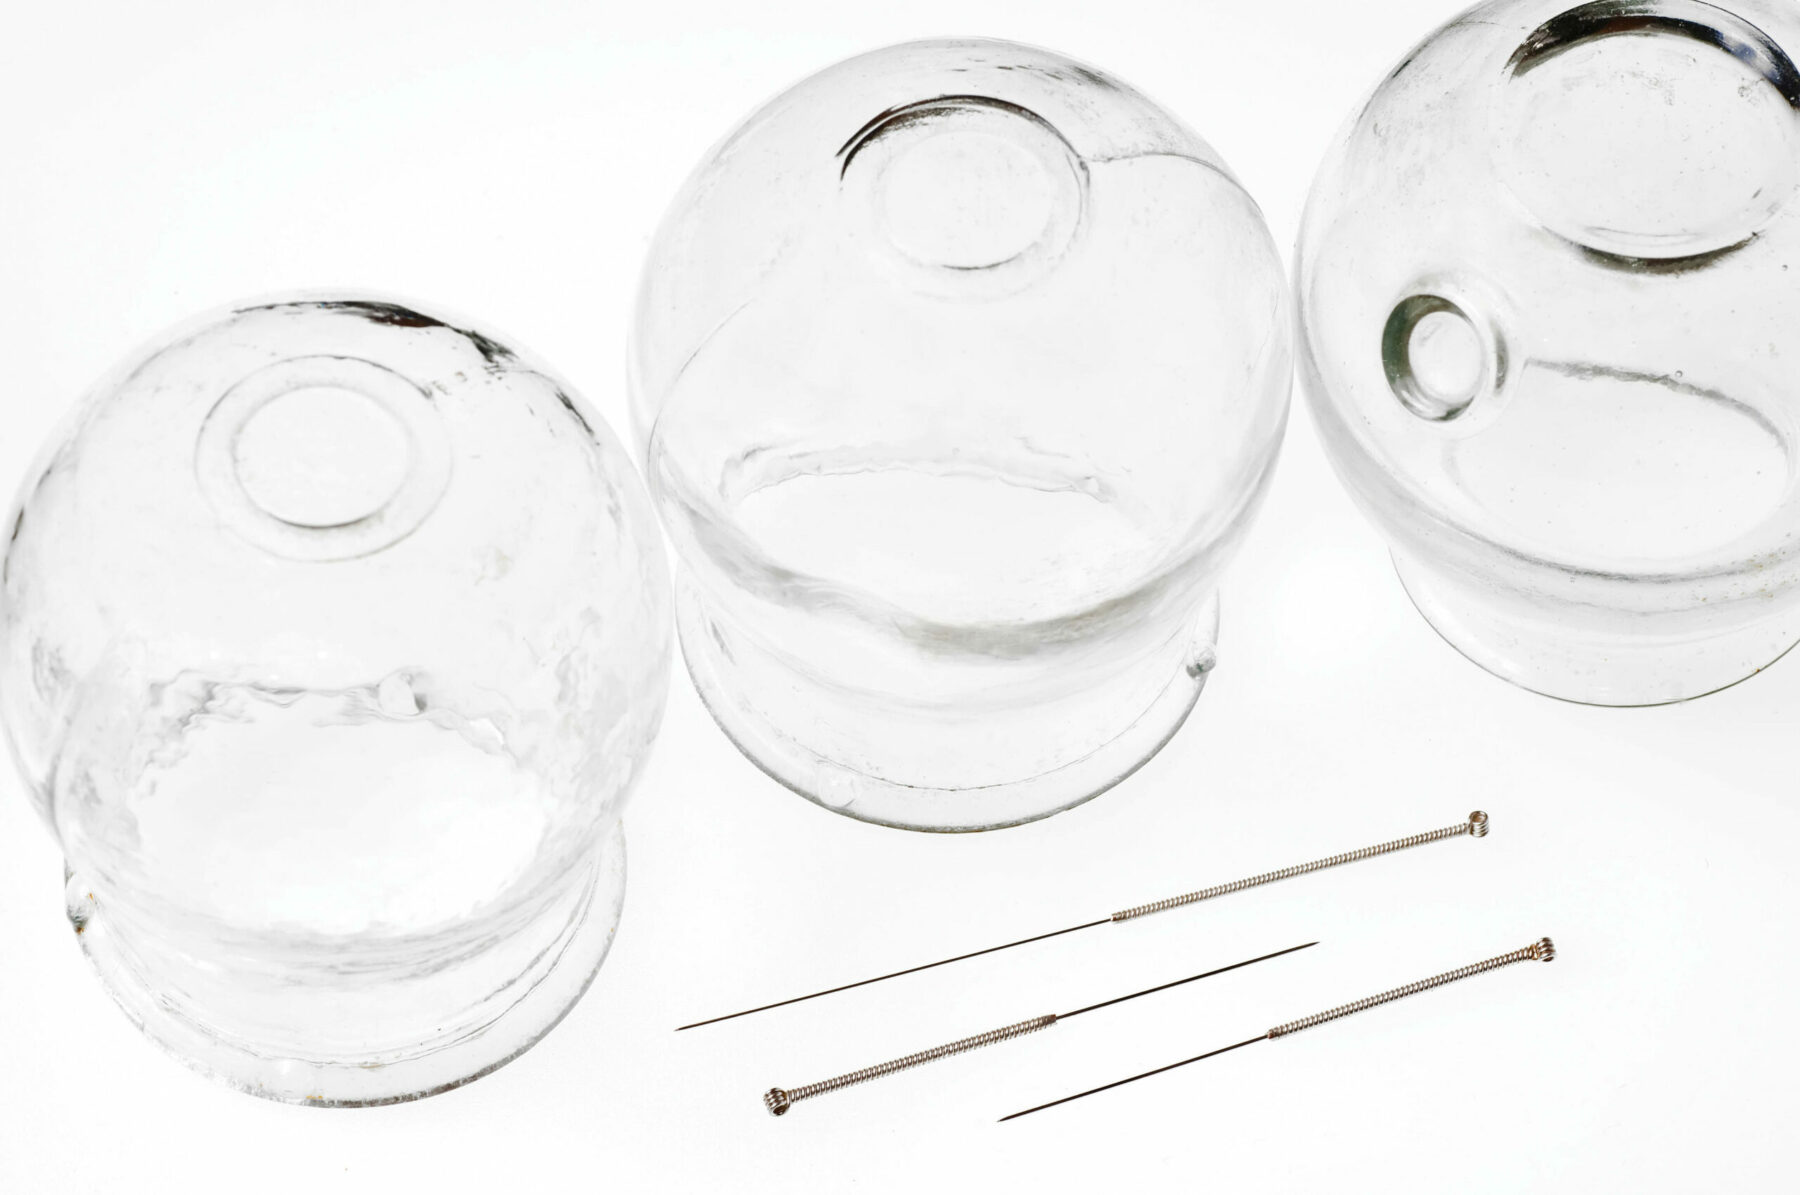 acupuncture needles and cupping glasses.